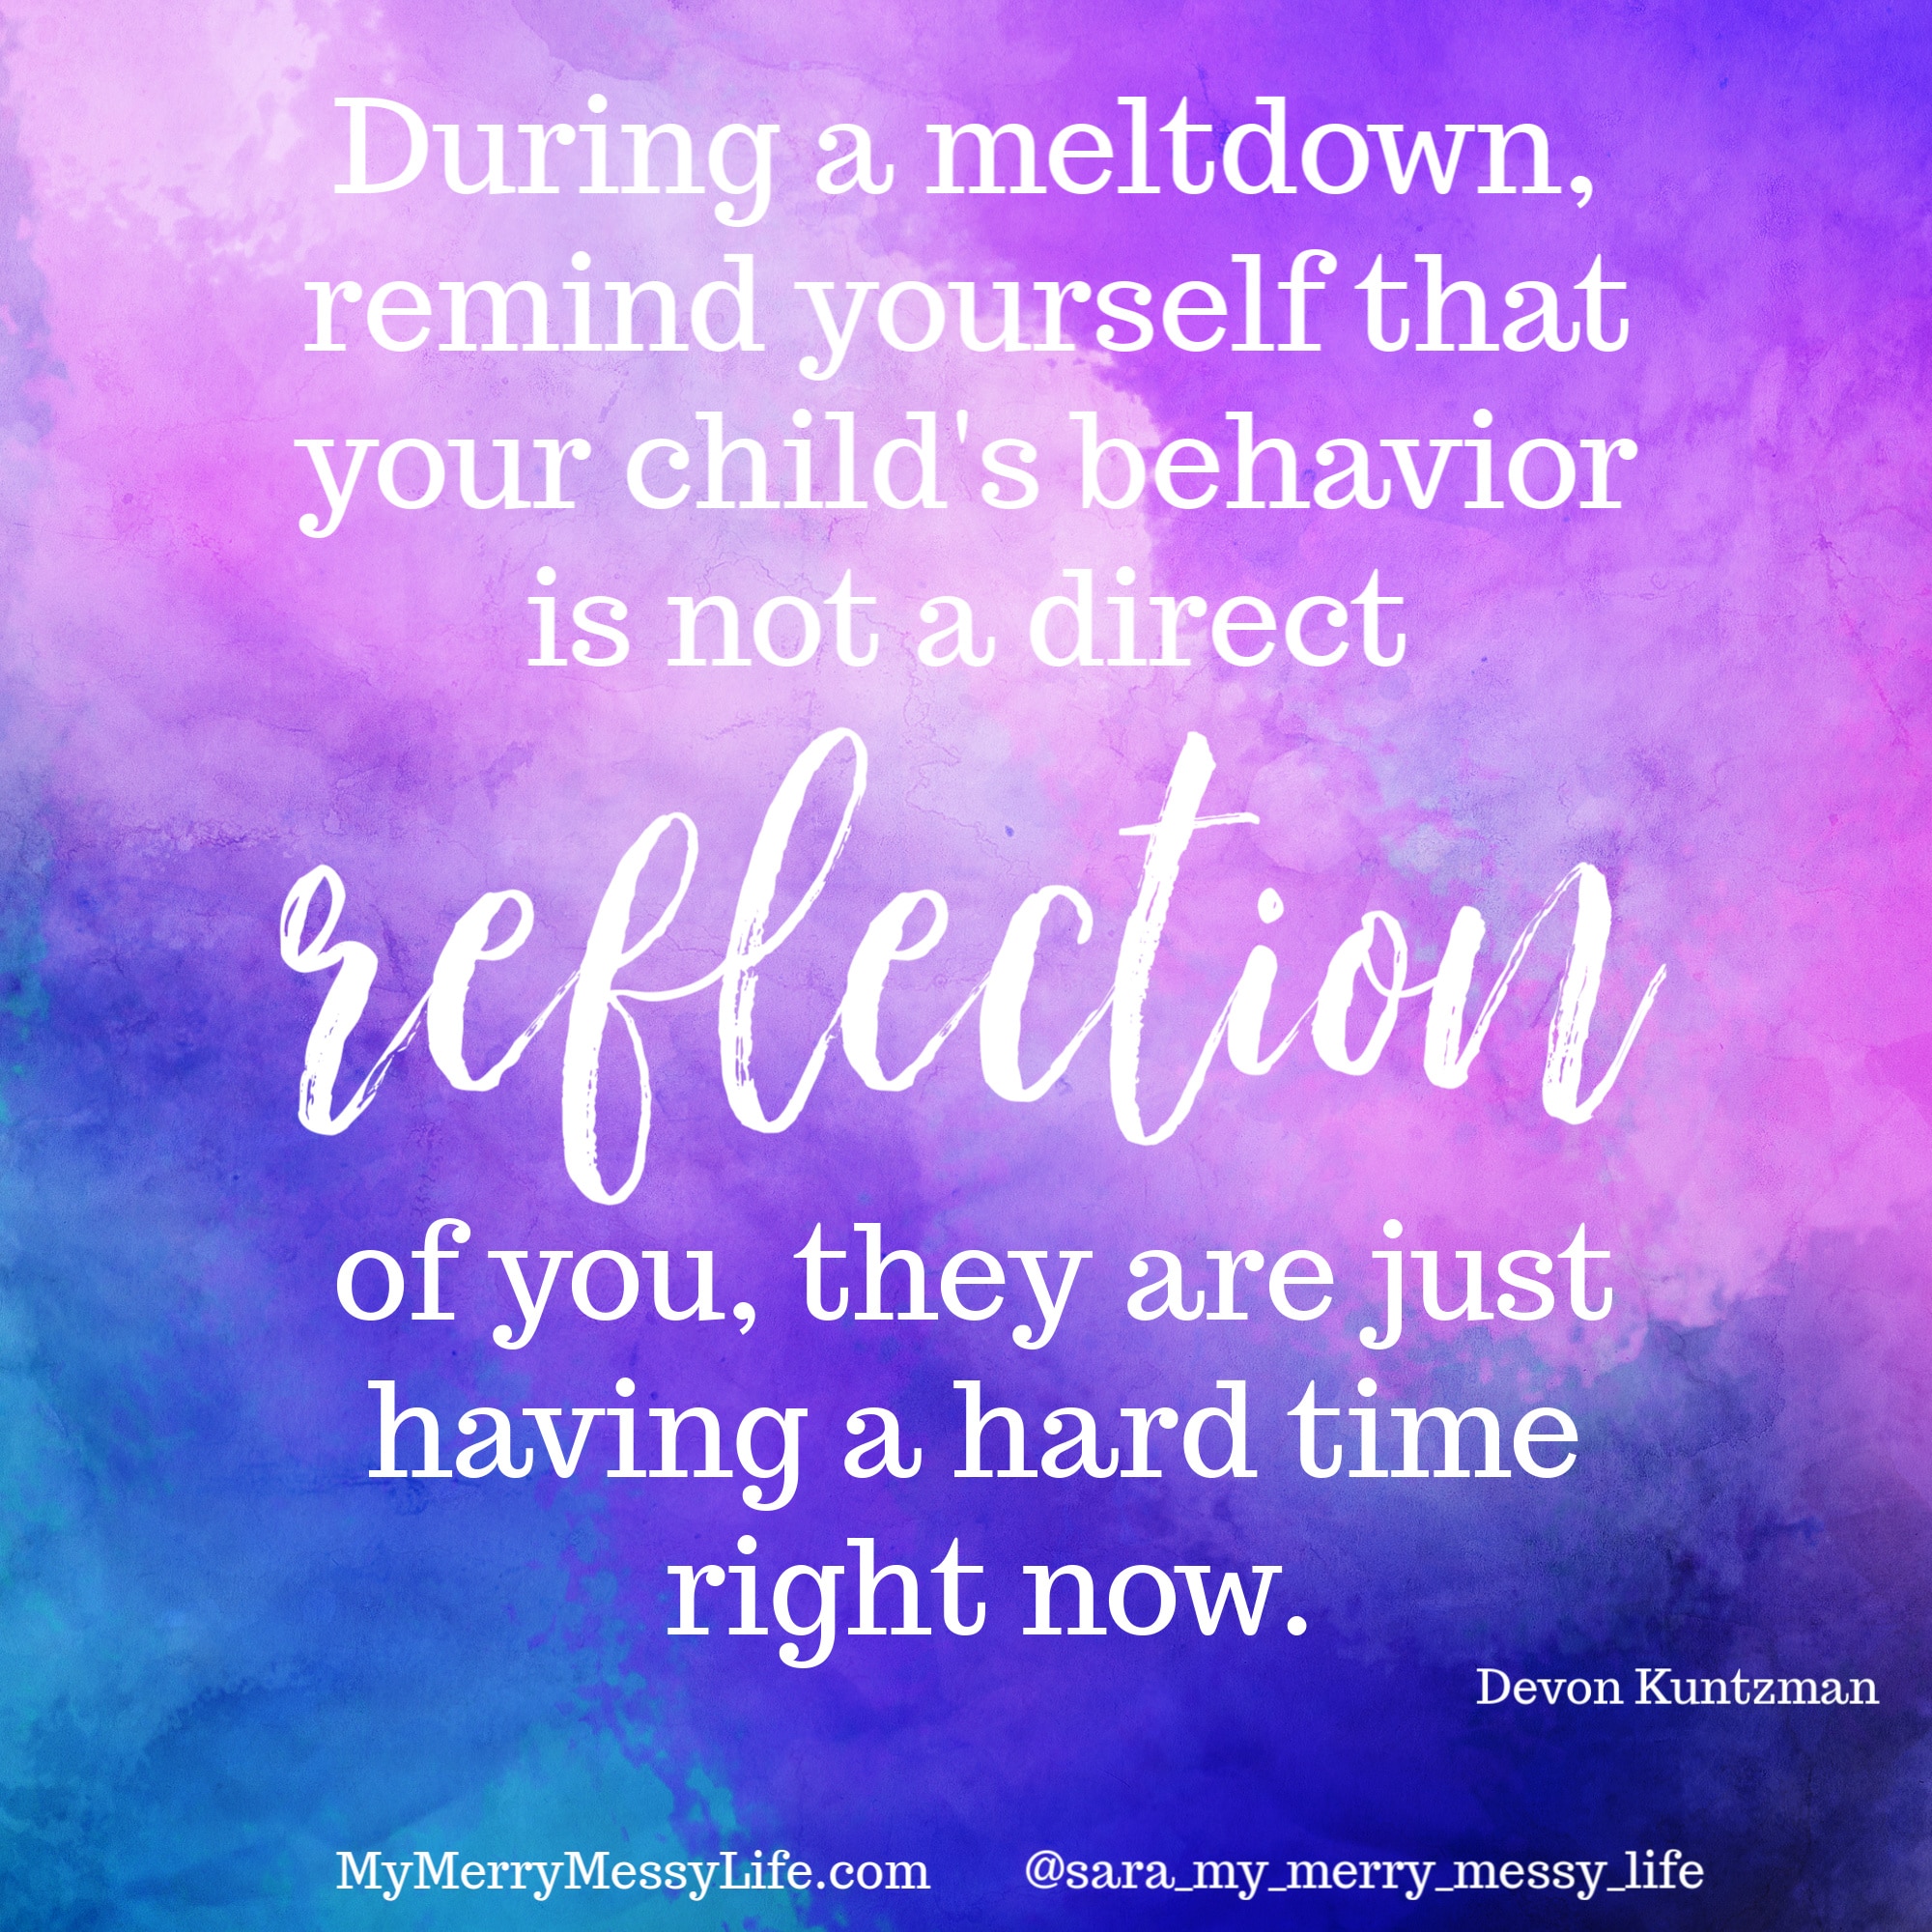 During a meltdown, remind yourself that your child's behavior is not a direct reflection of you, they are just having a hard time right now. - Devon Kuntzman on episode #19 of The Merry Messy Moms Show podcast